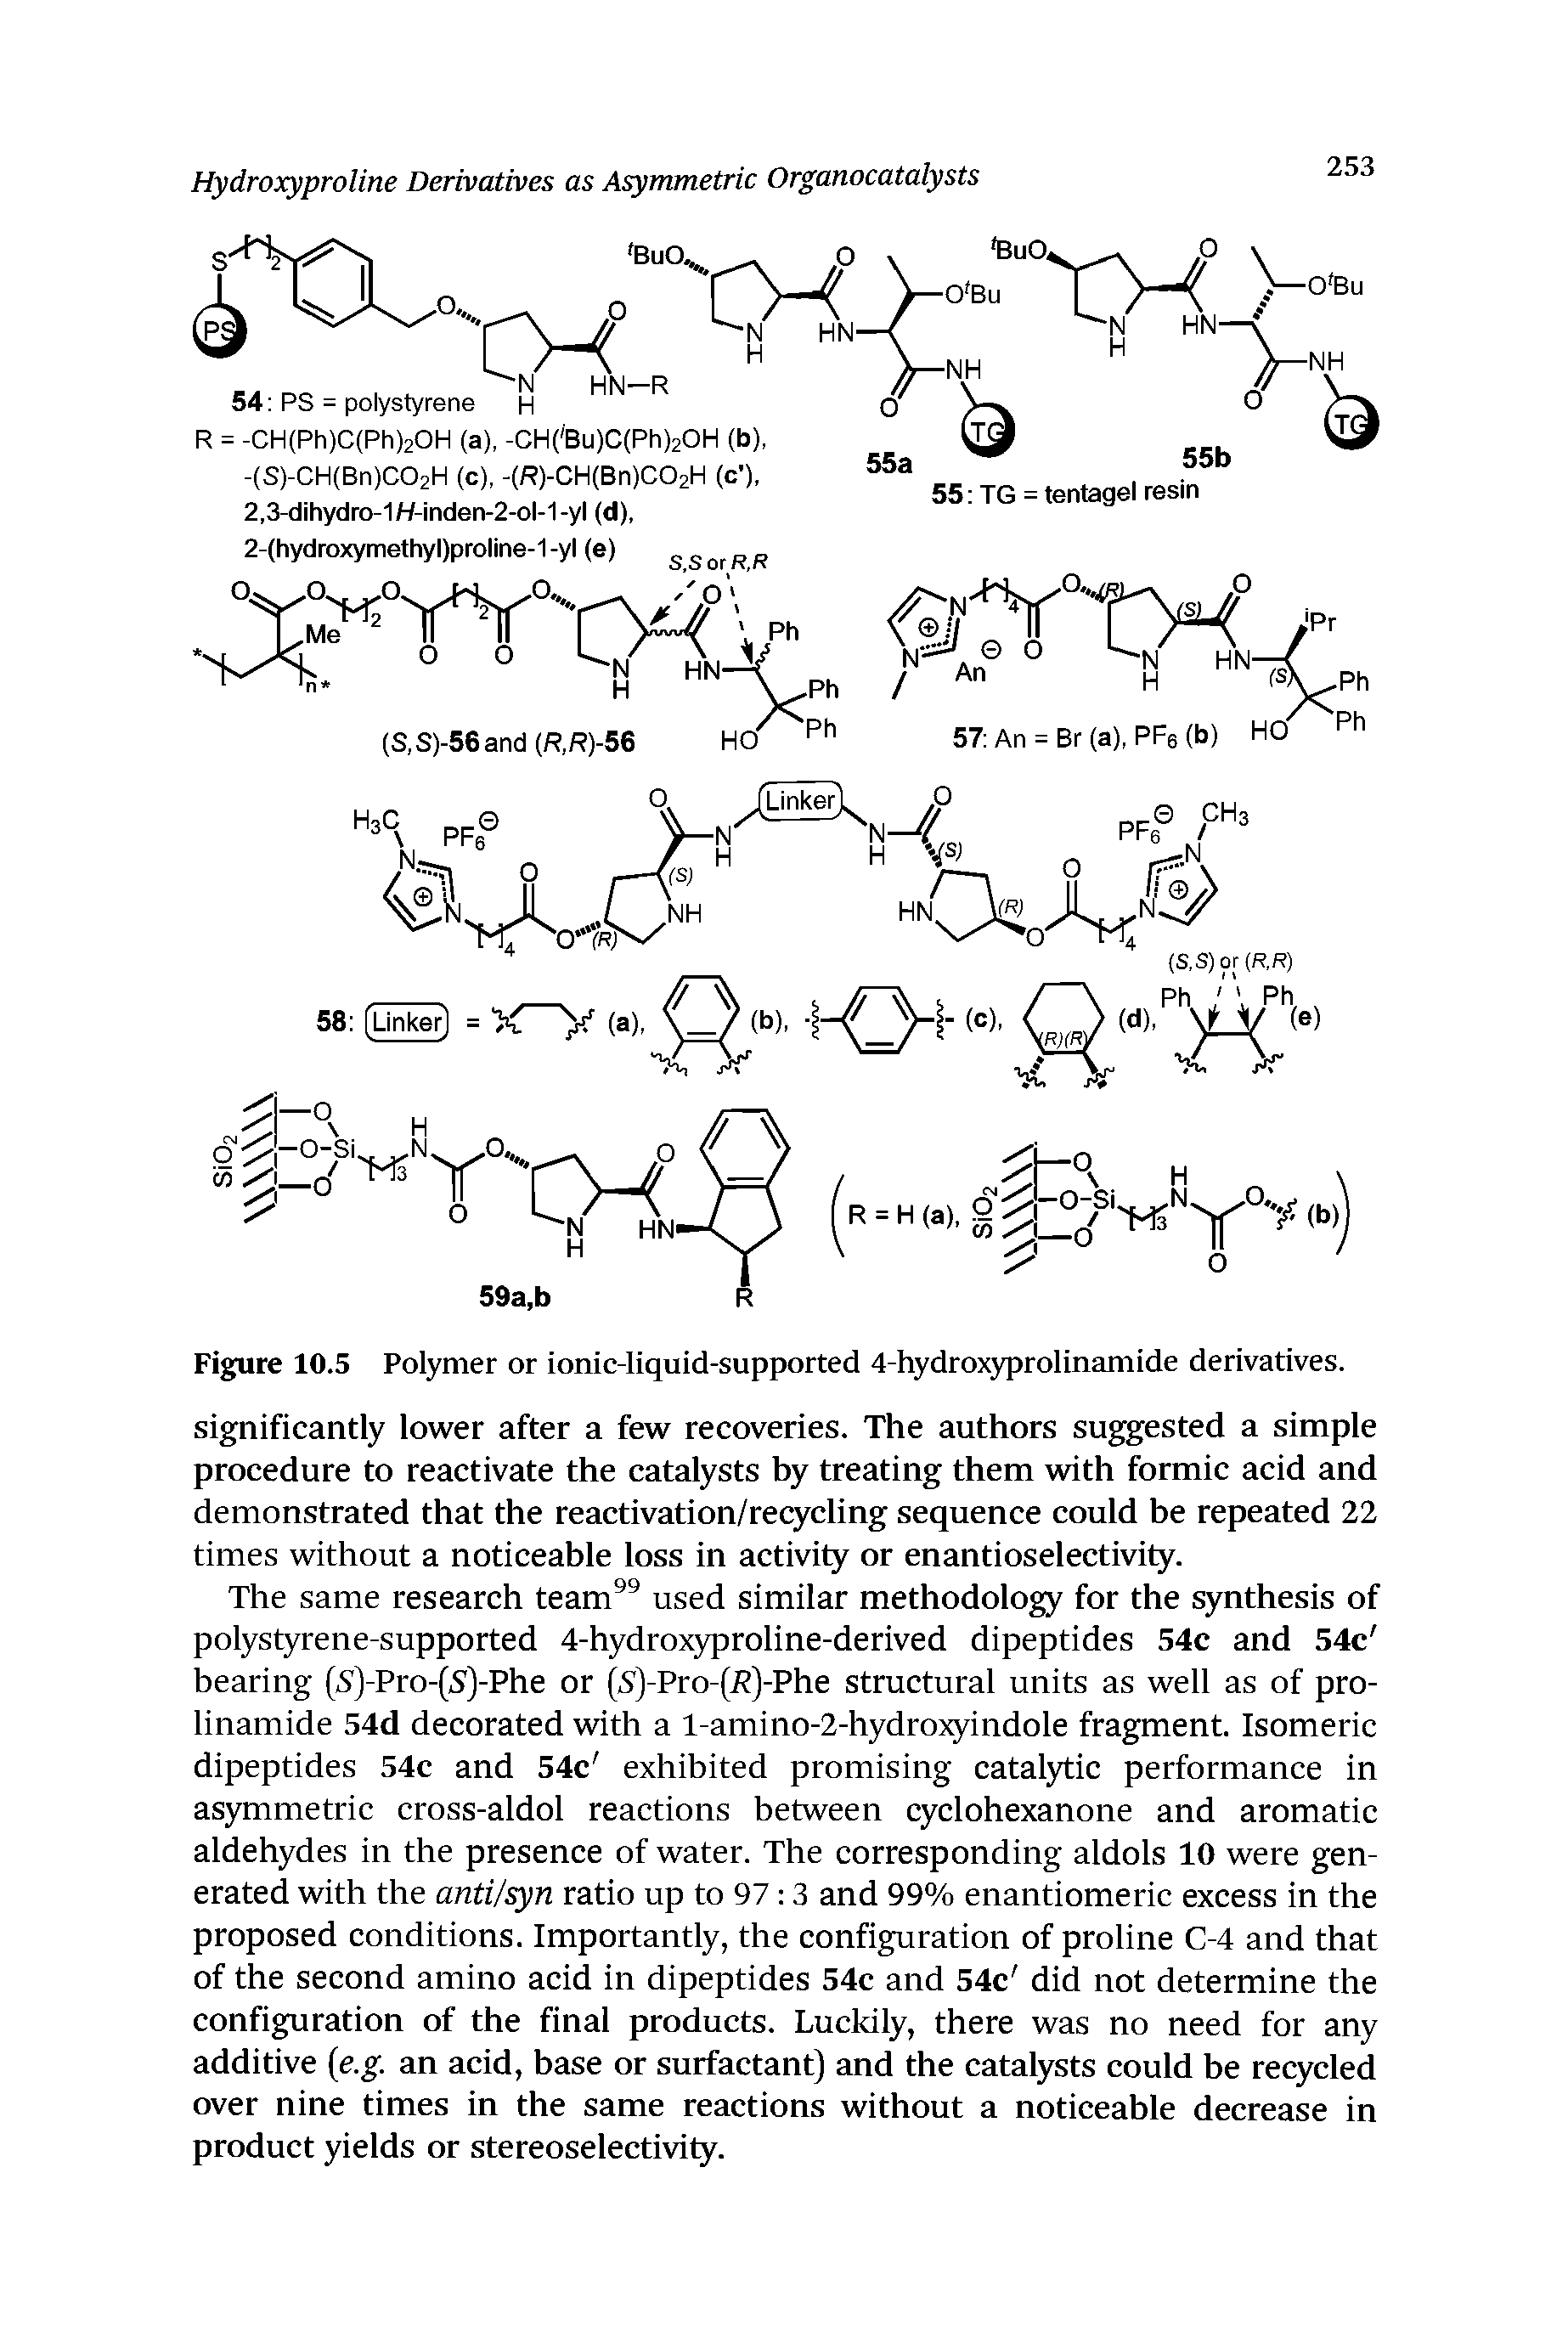 Figure 10.5 Polymer or ionic-liquid-supported 4-hydroxyprolinamide derivatives.